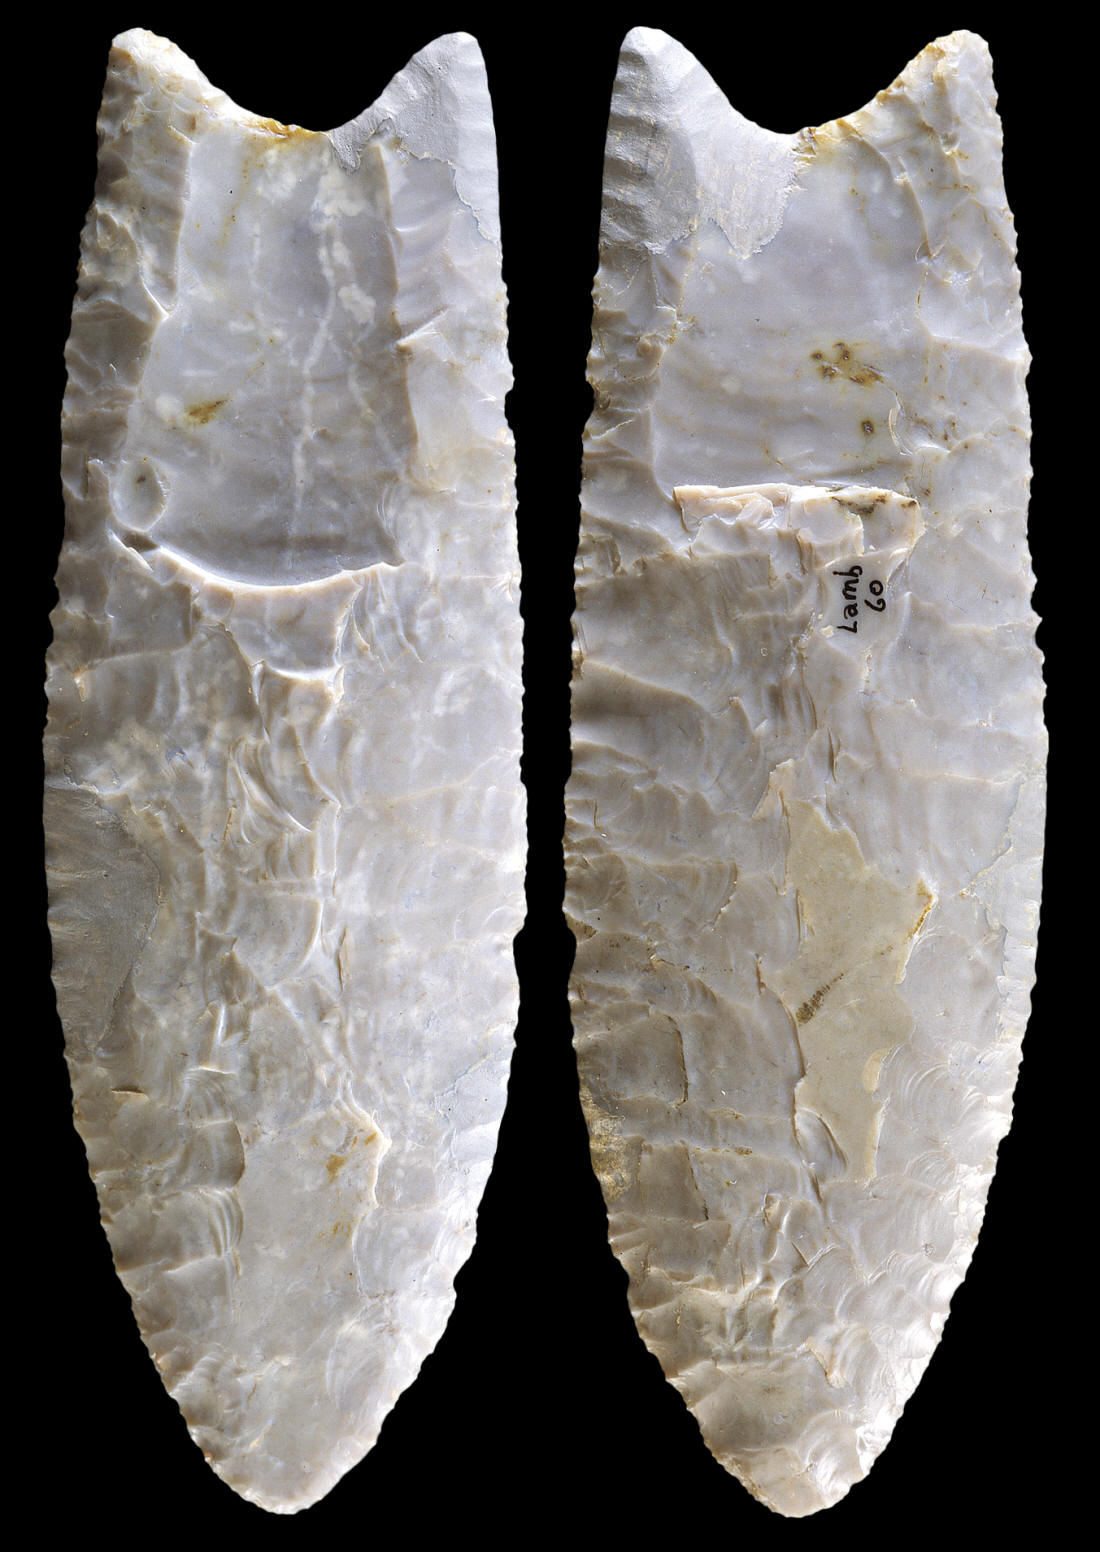 Fluted knife from the Lamb site, western New York.